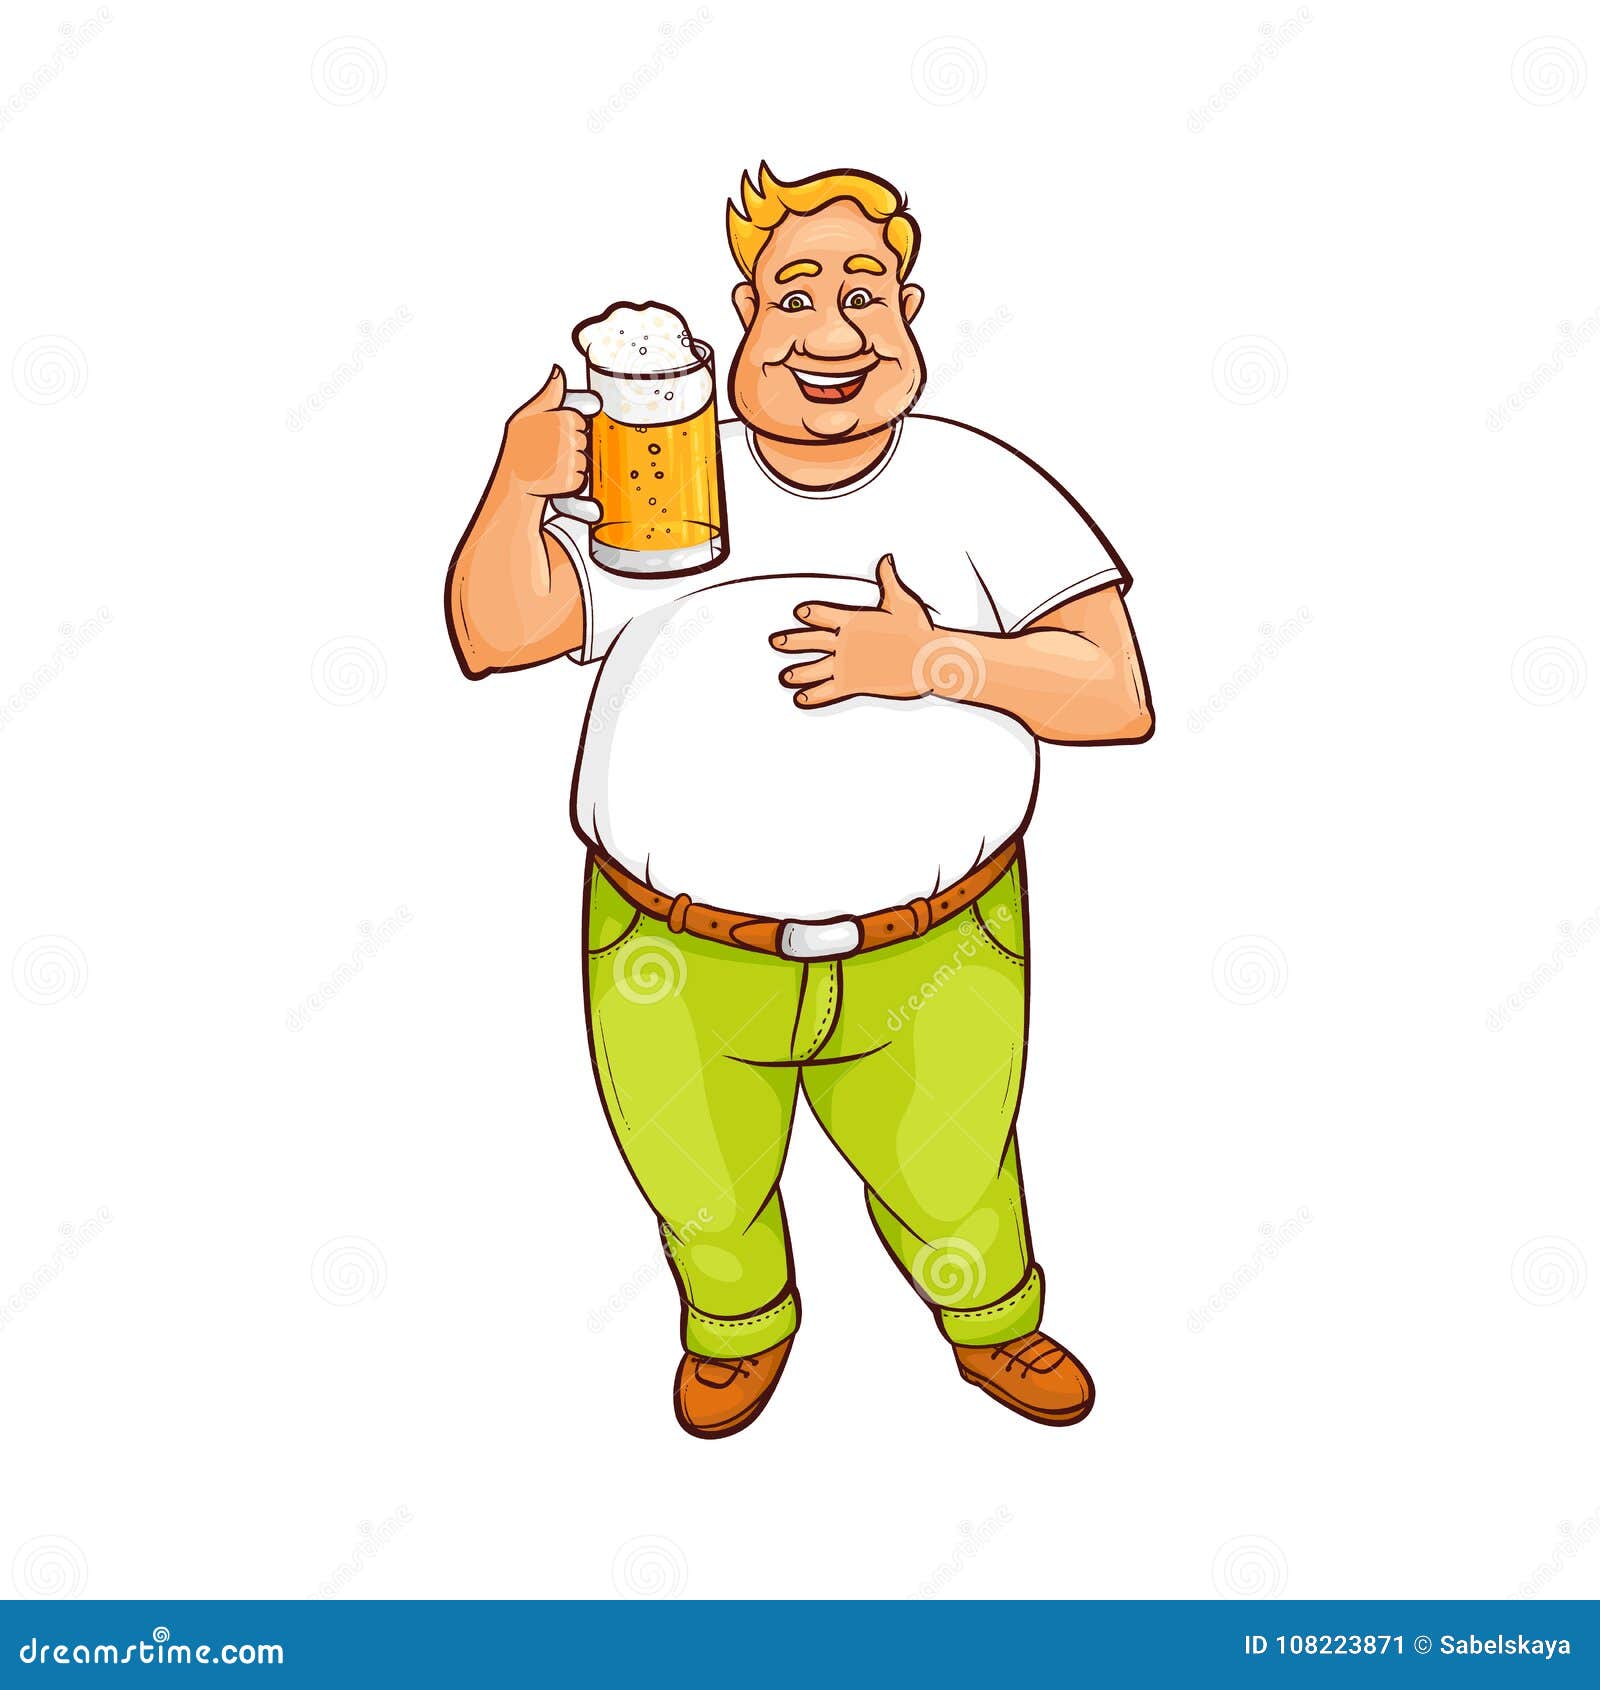 Picture of an animated chubby man - Nude gallery